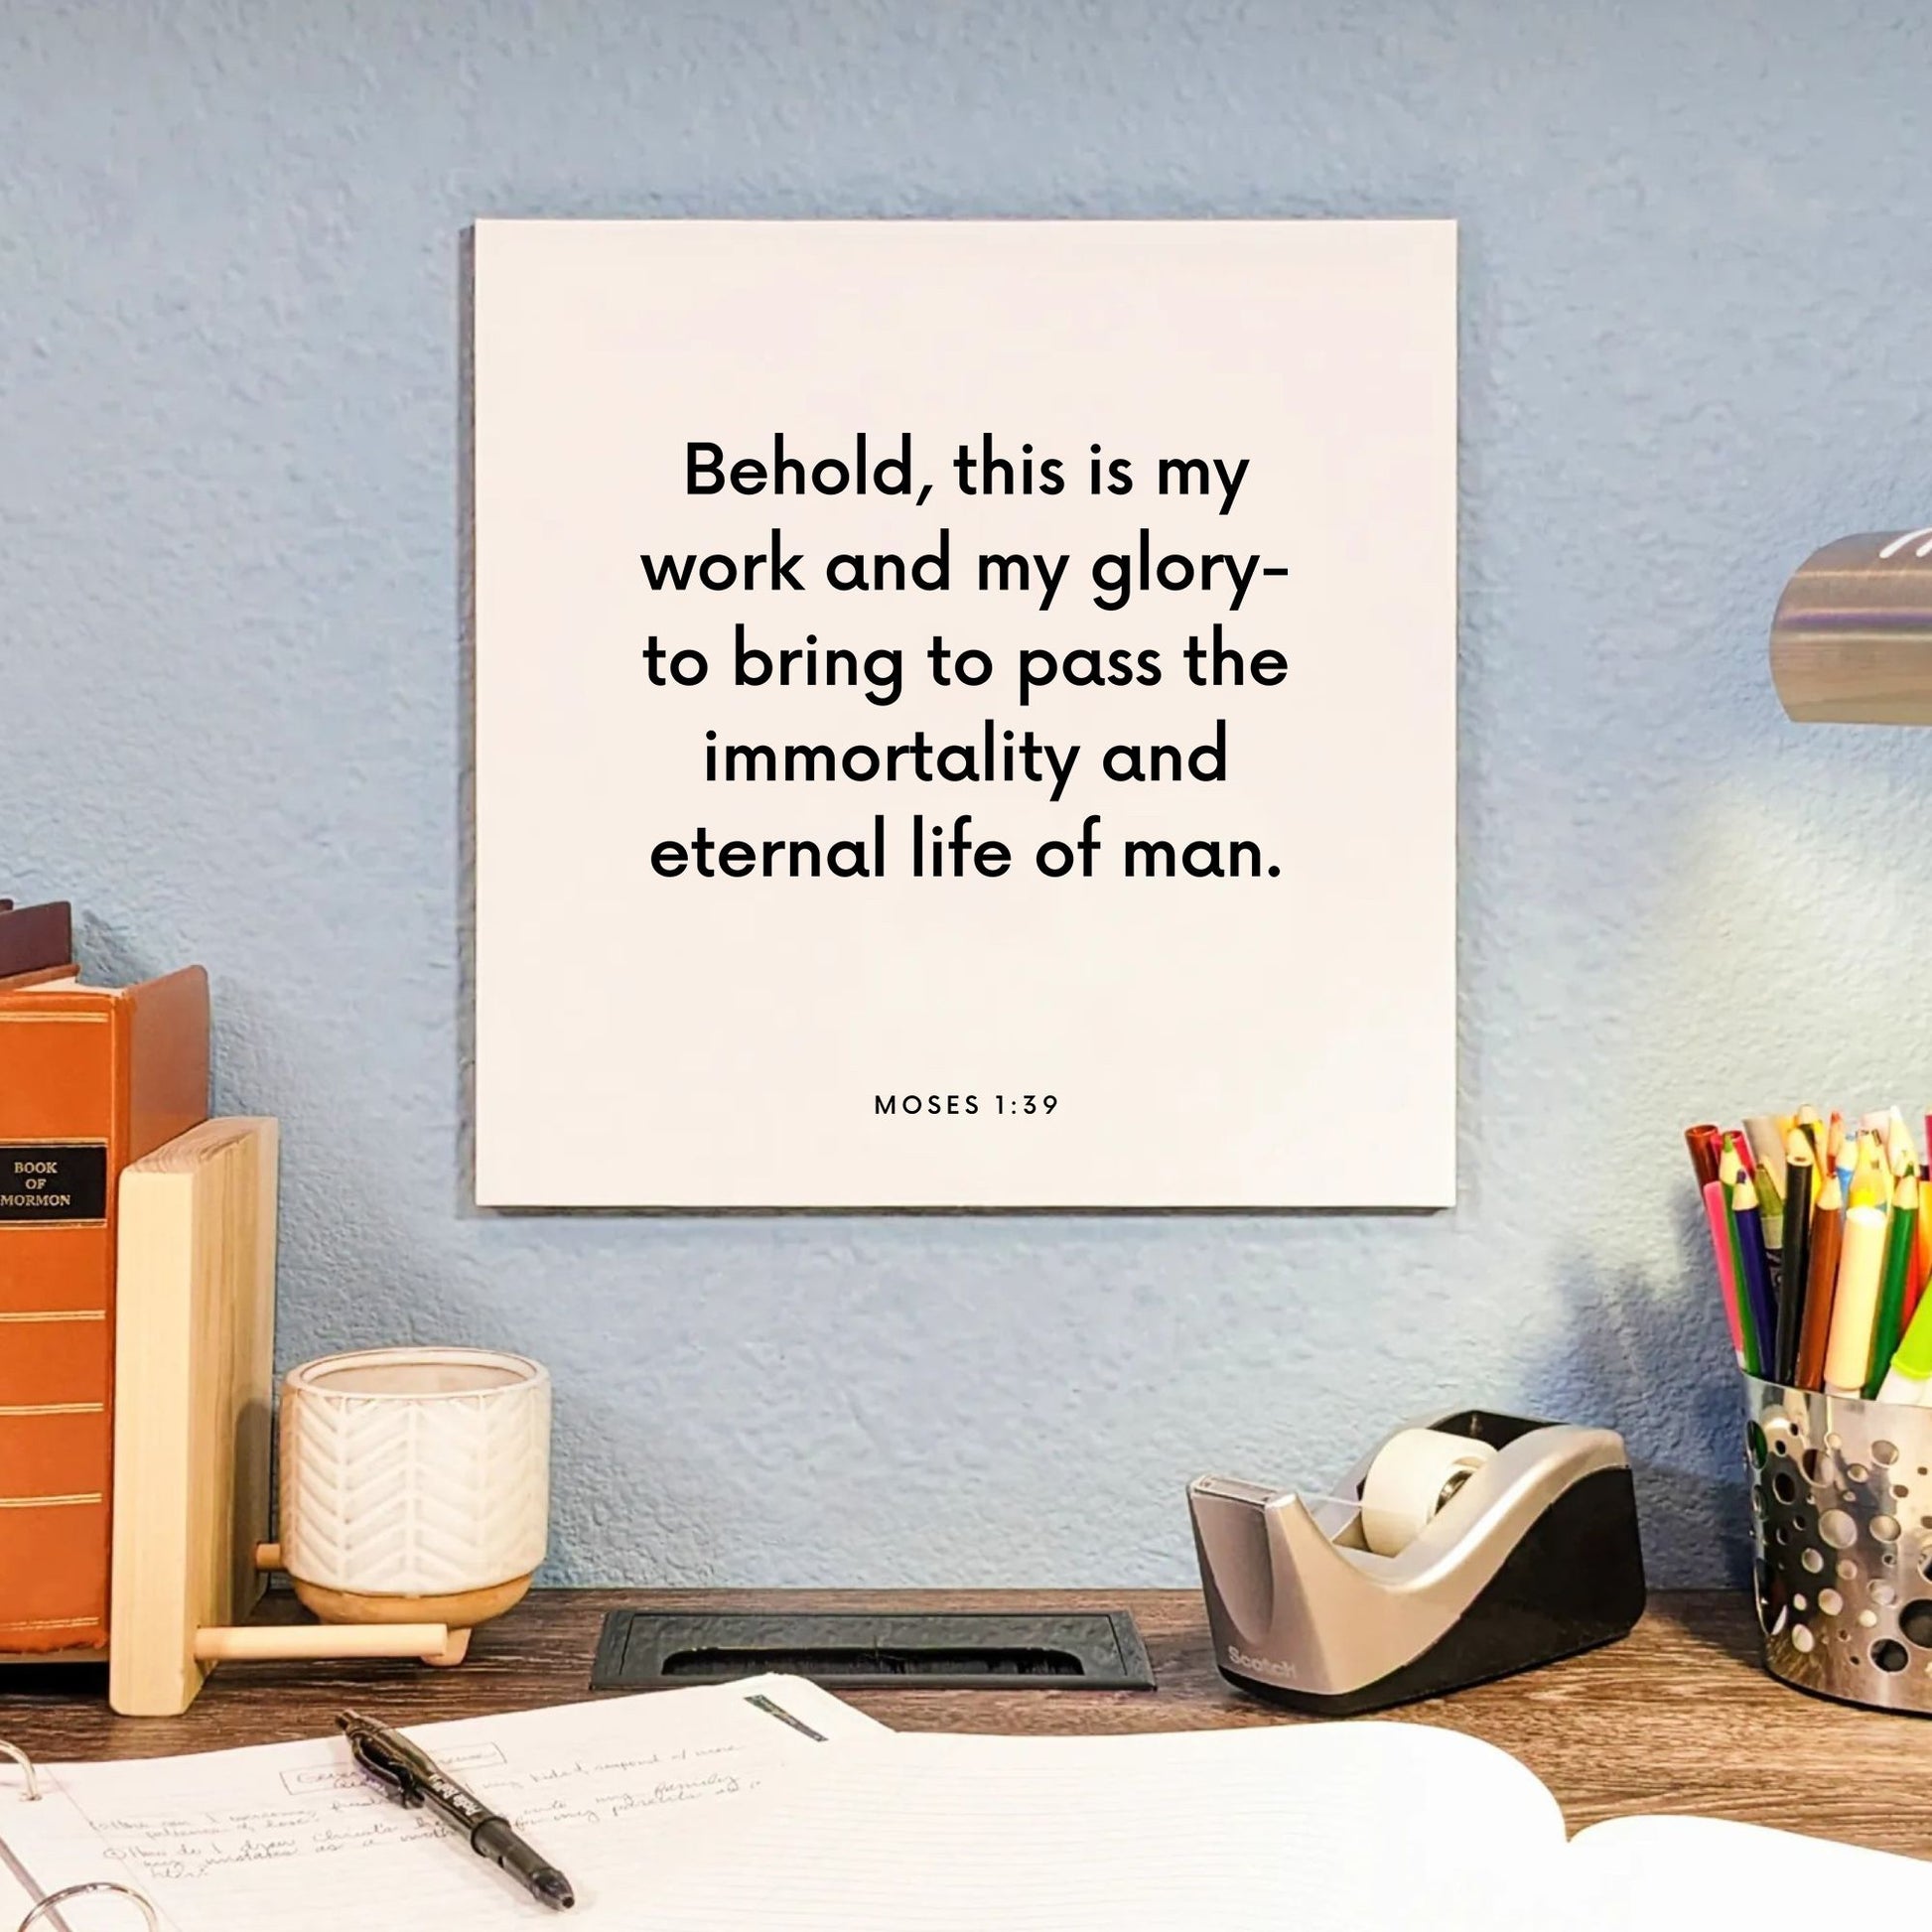 Desk mouting of the scripture tile for Moses 1:39 - "Behold, this is my work and my glory"